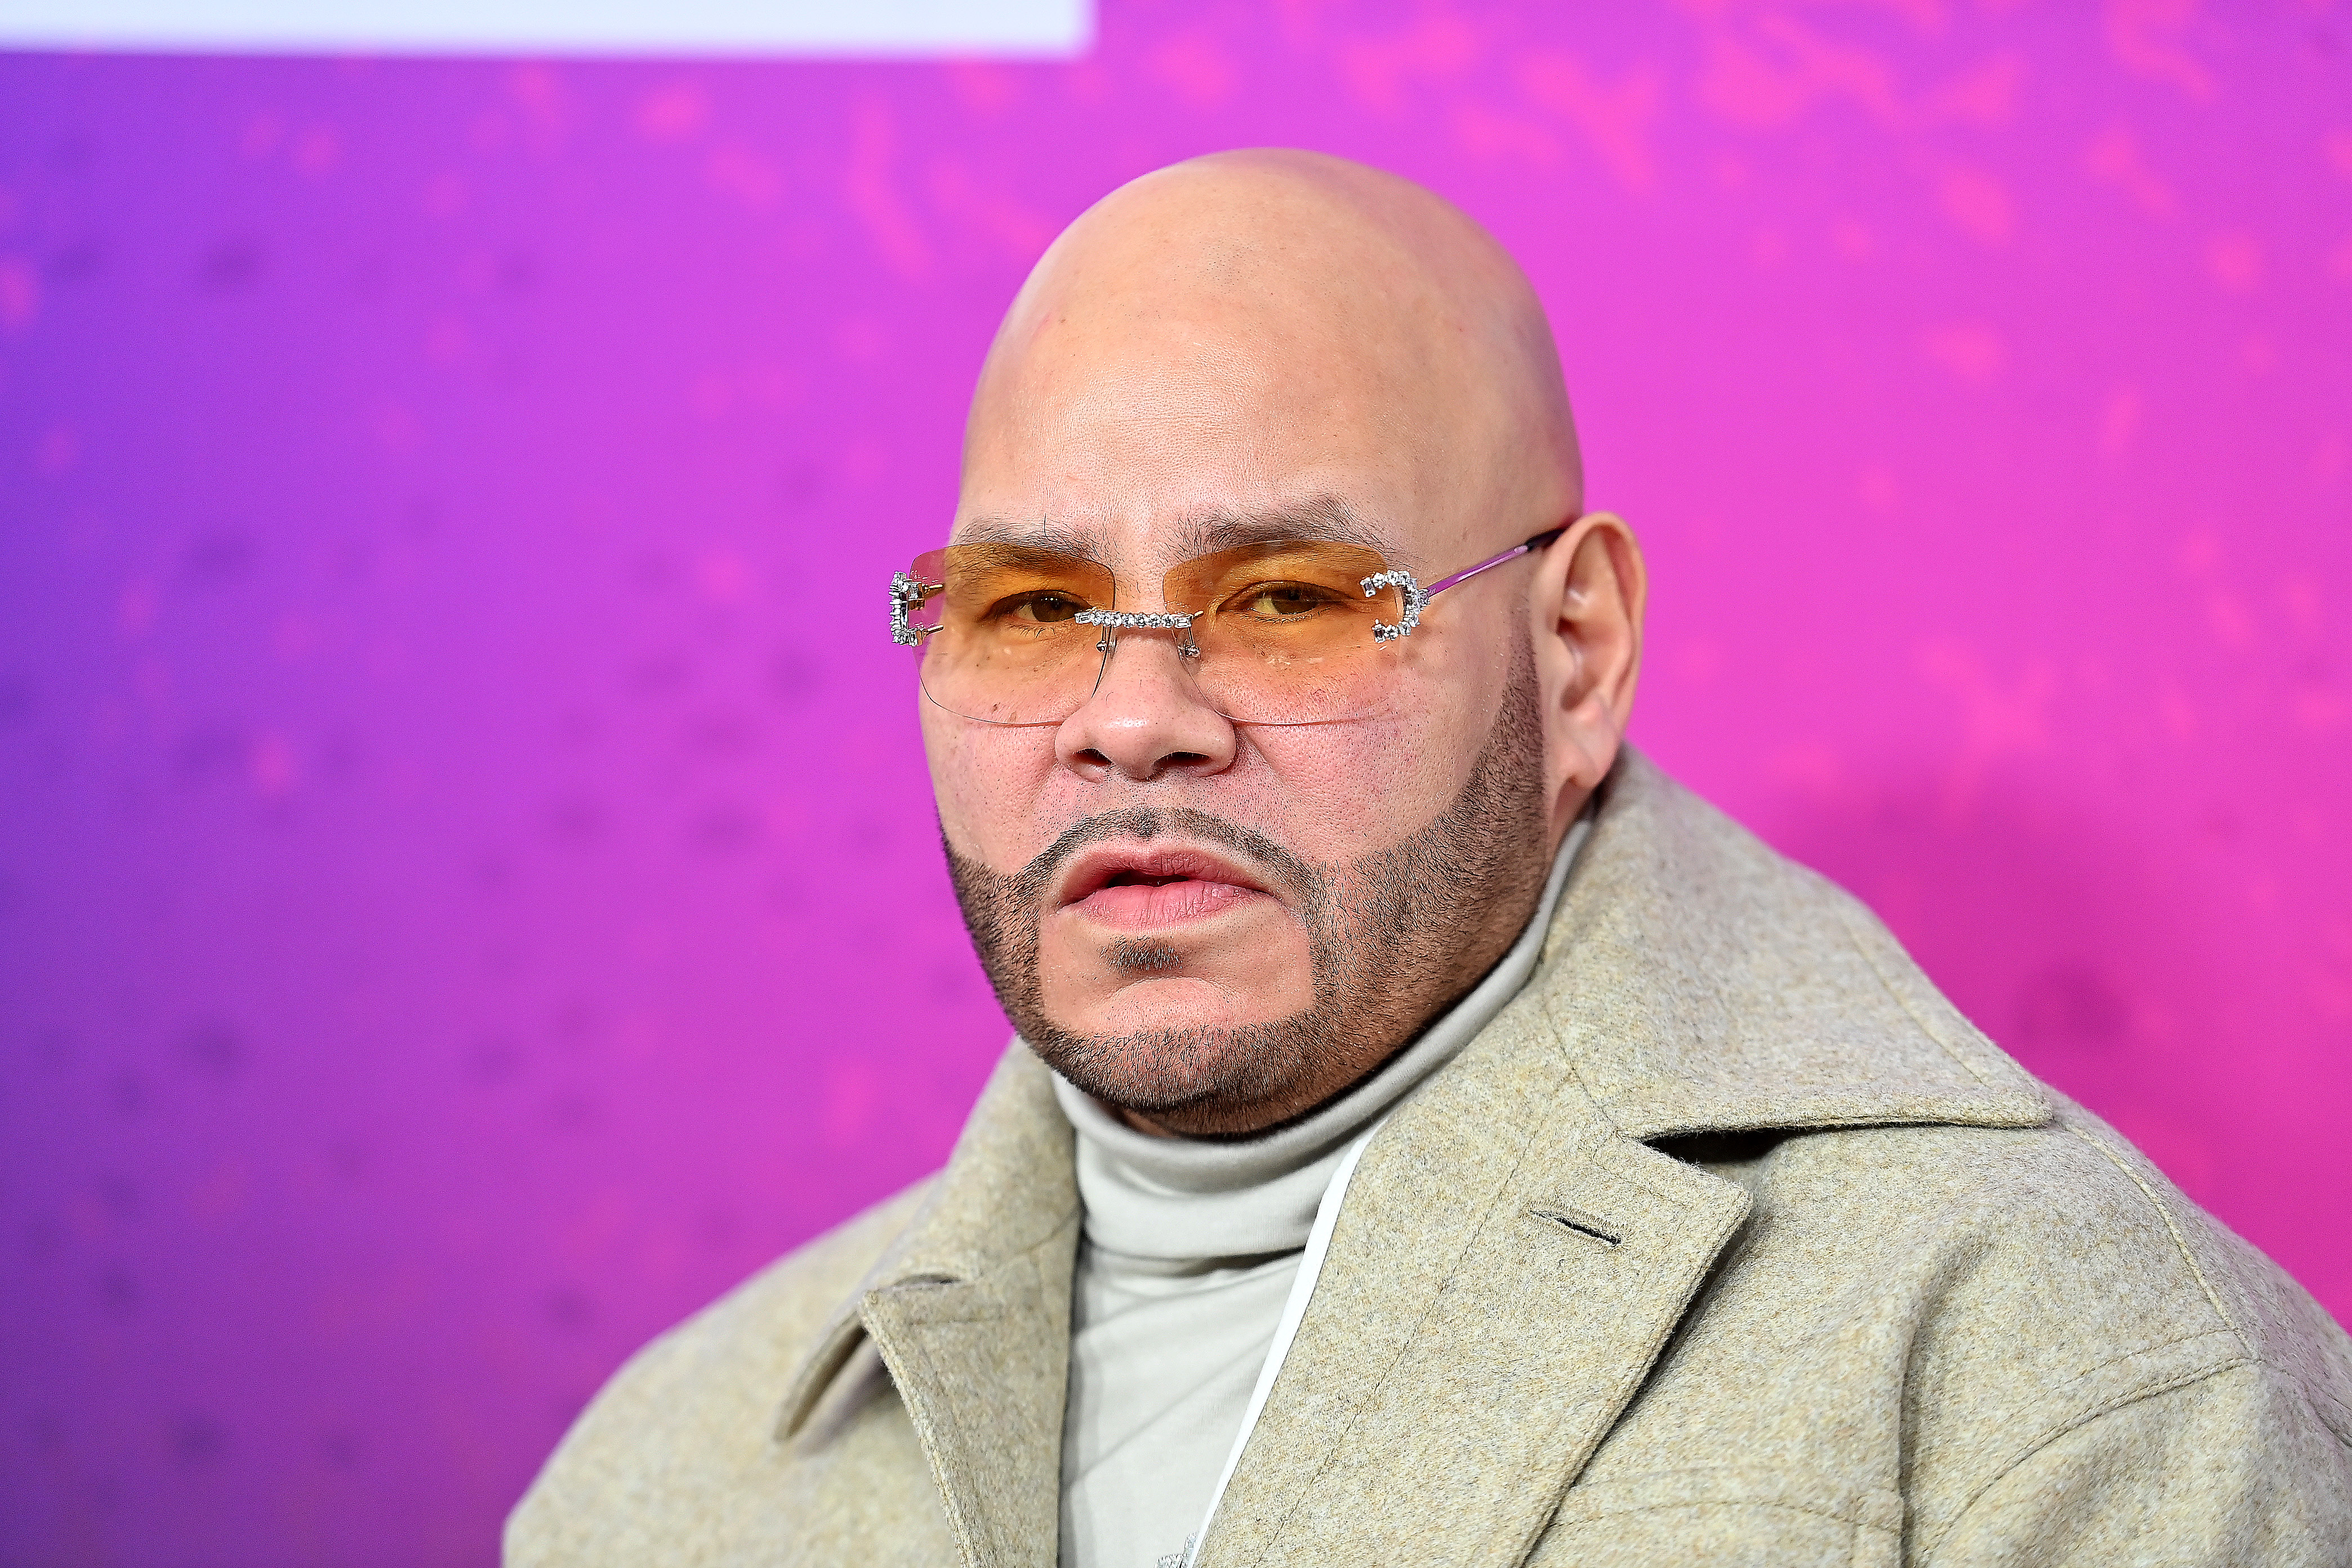 Fat Joe Recalls Becoming A Father At 19 As The “Scariest Moment Of My Life”